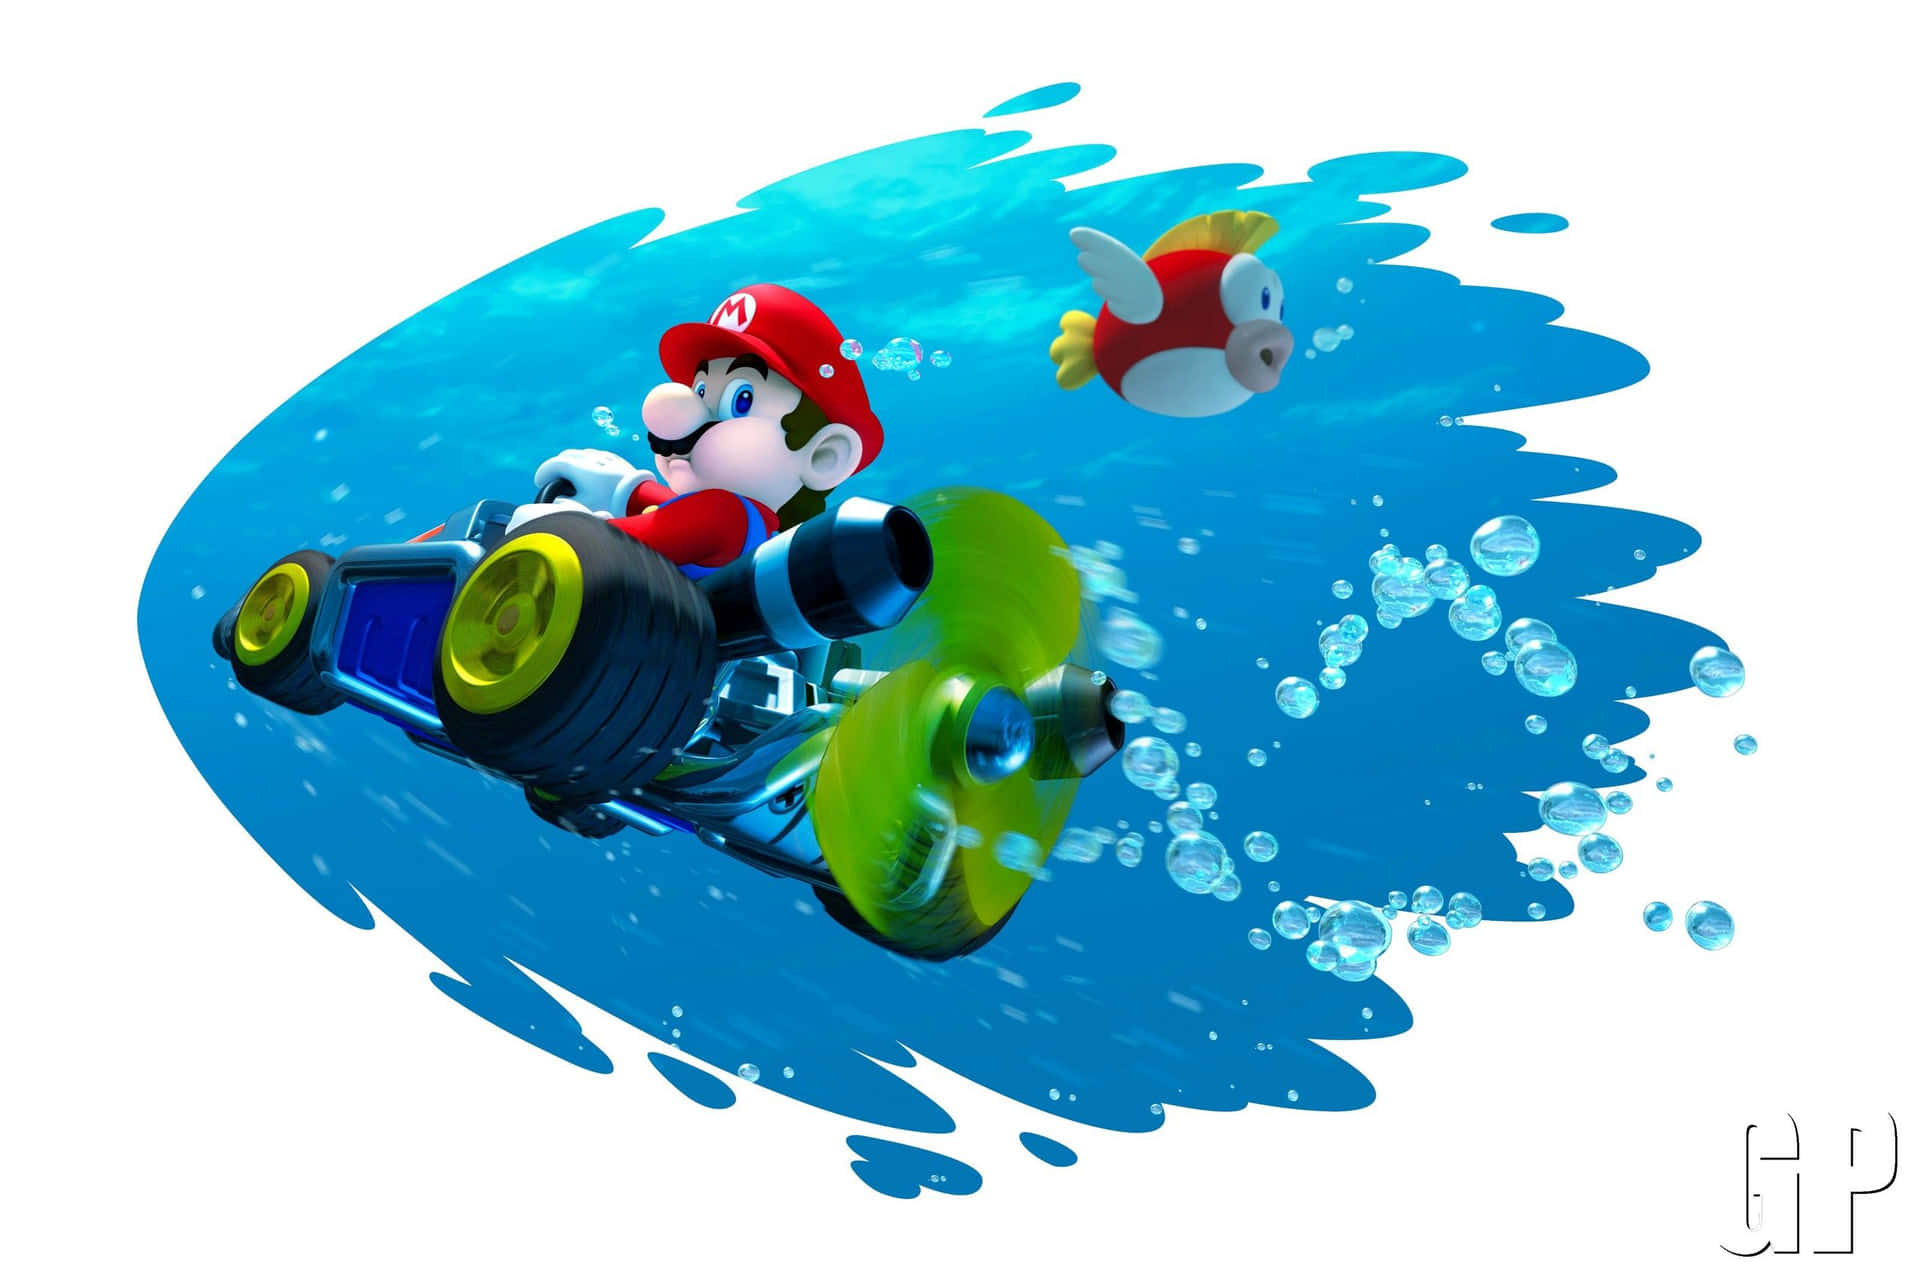 Take the ride of a lifetime with Mario Kart!